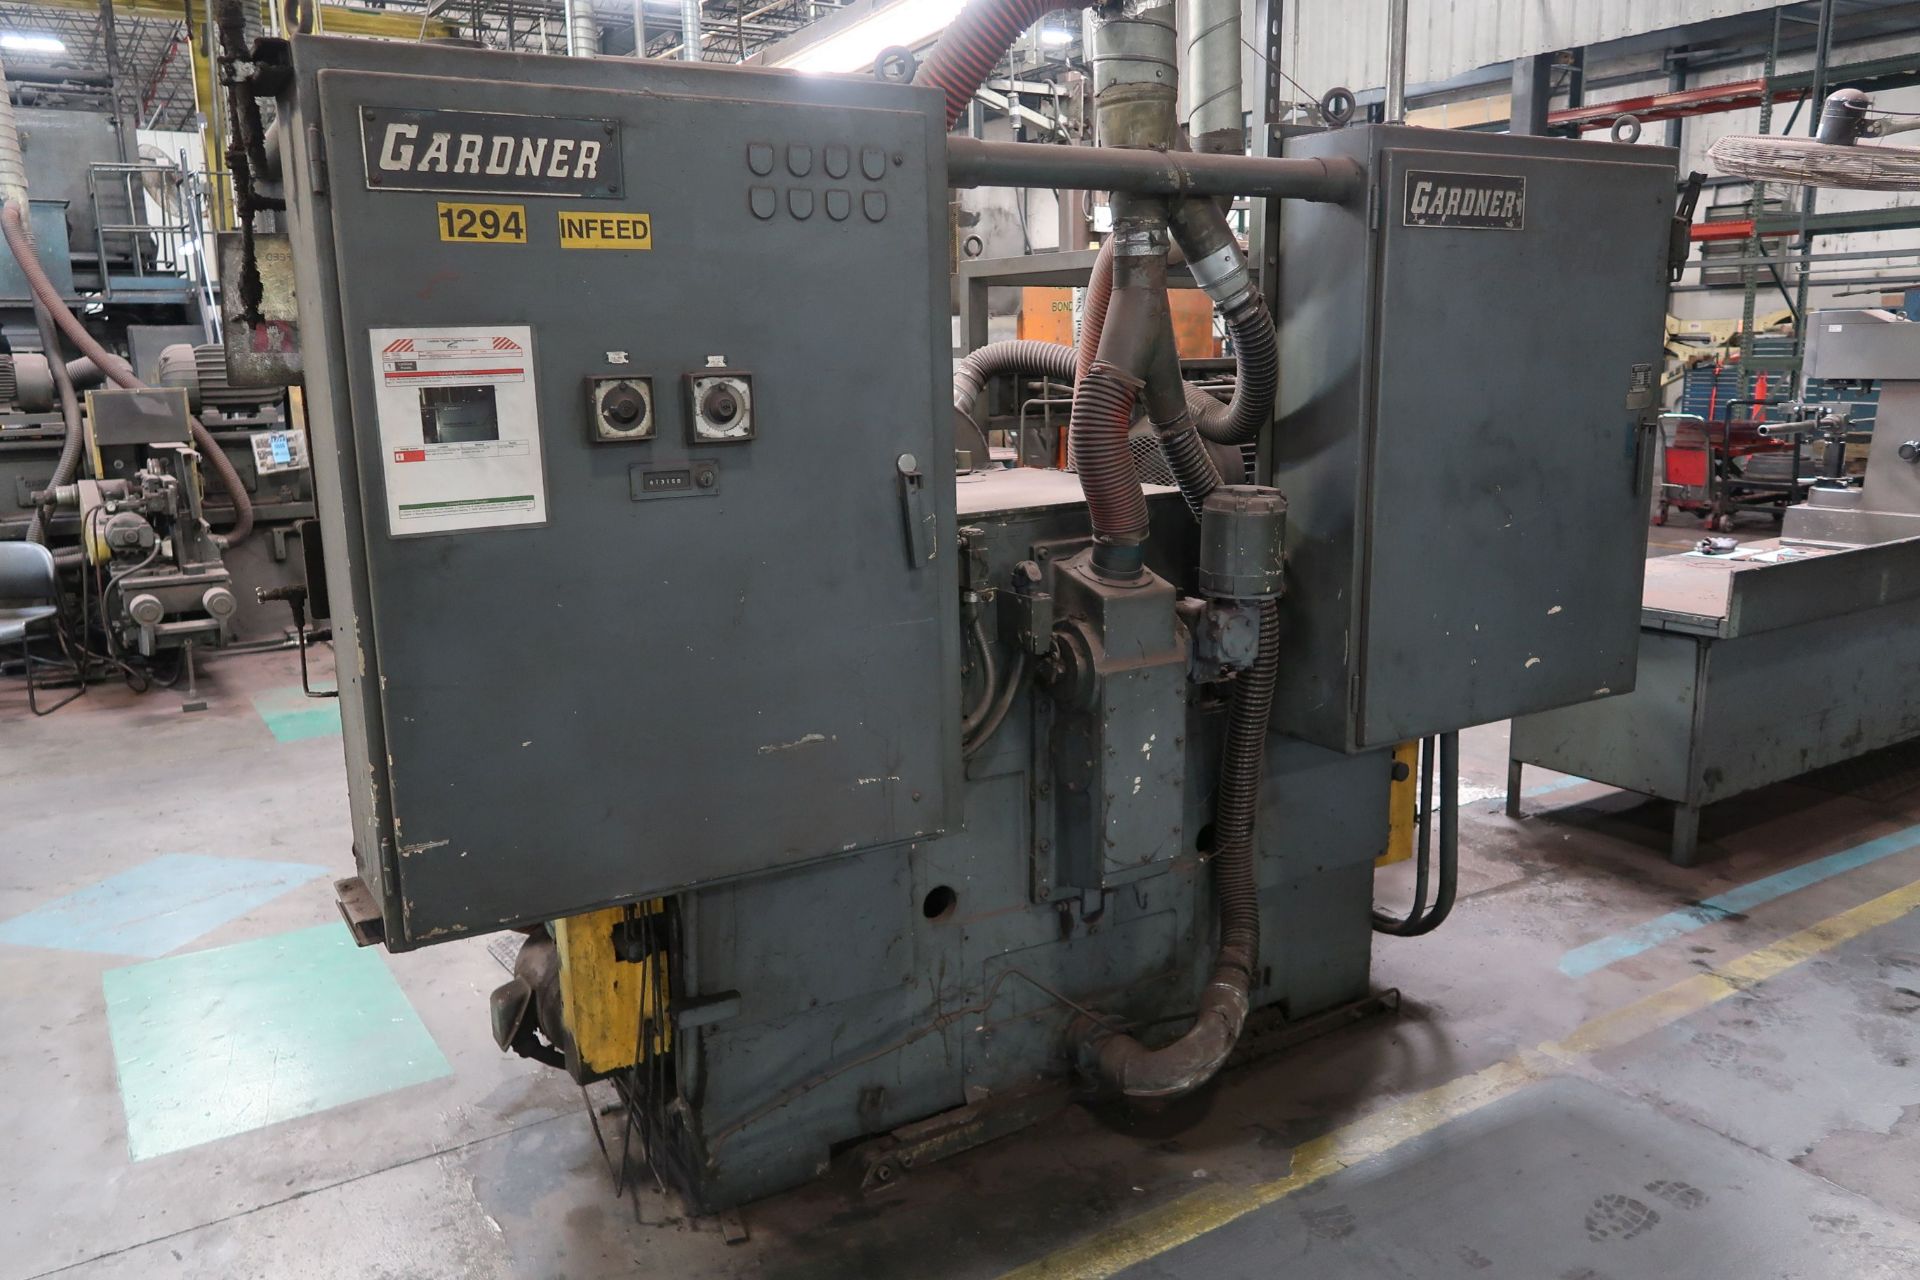 GARDNER 30" MODEL 120-A TWIN DISC GRINDER, NO. 1293 **LOADING PRICE DUE TO ERRA - $1,500.00** - Image 6 of 7